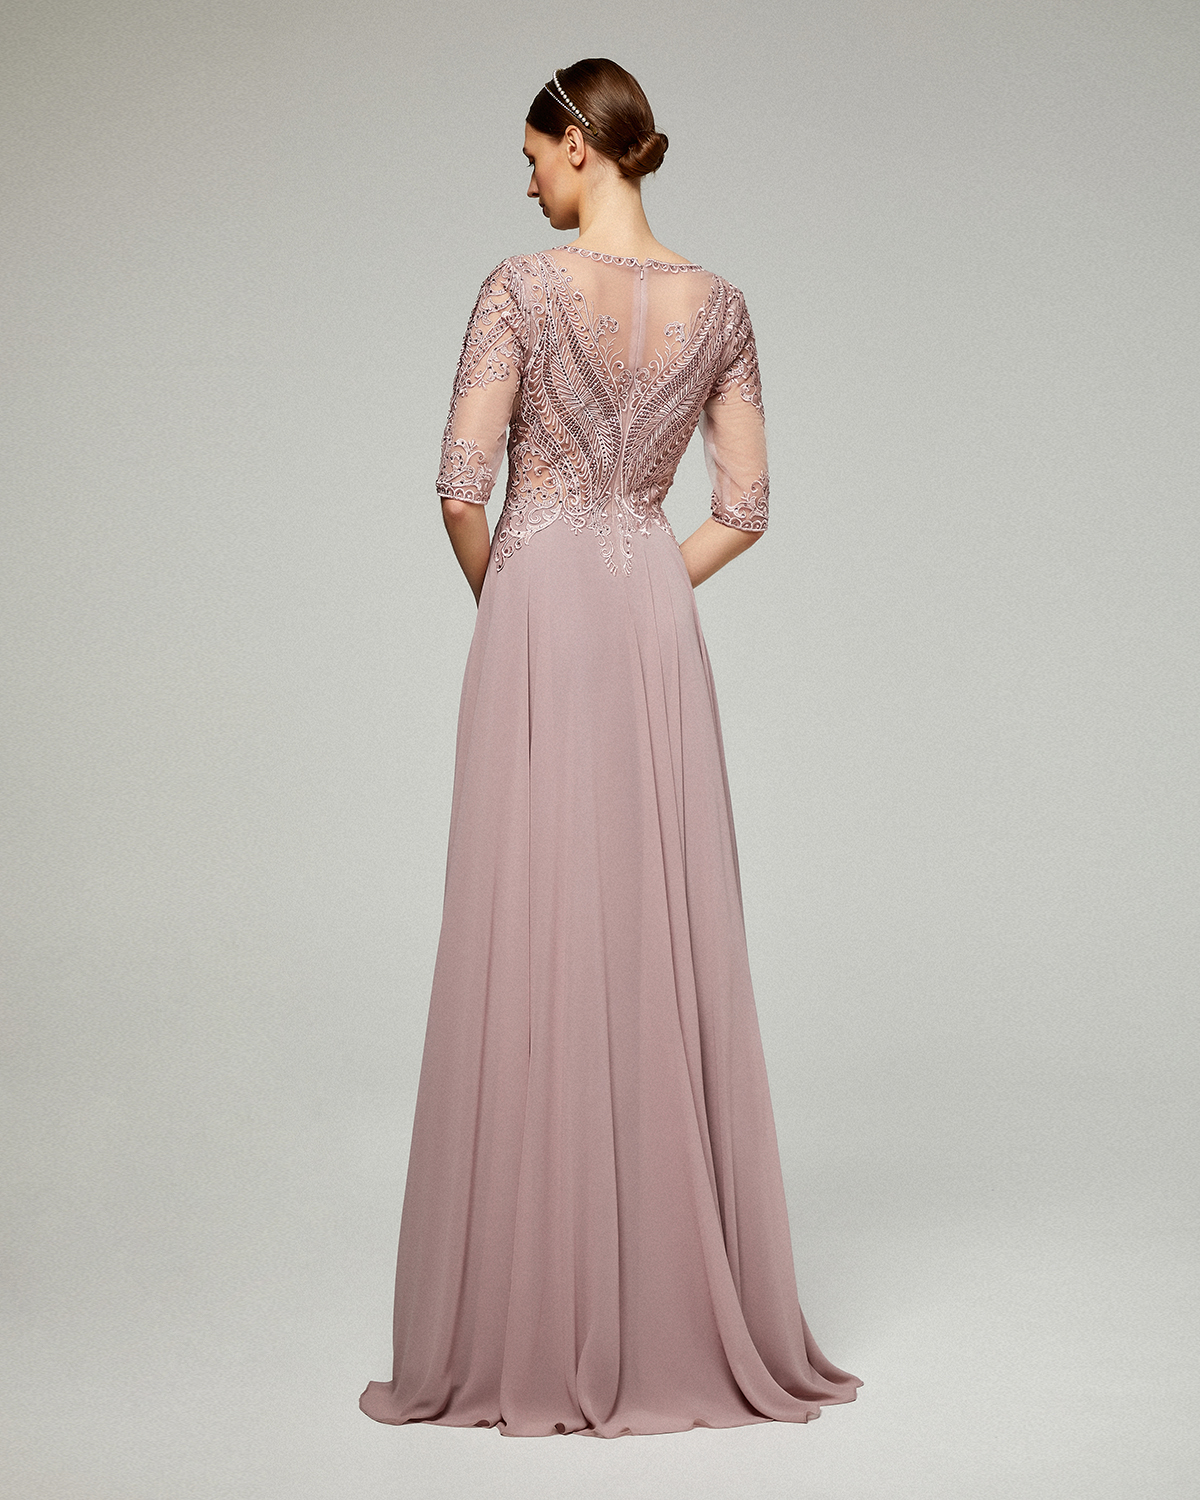 Long evening chiffon dress with lace top and sleeves for the mother of the bride